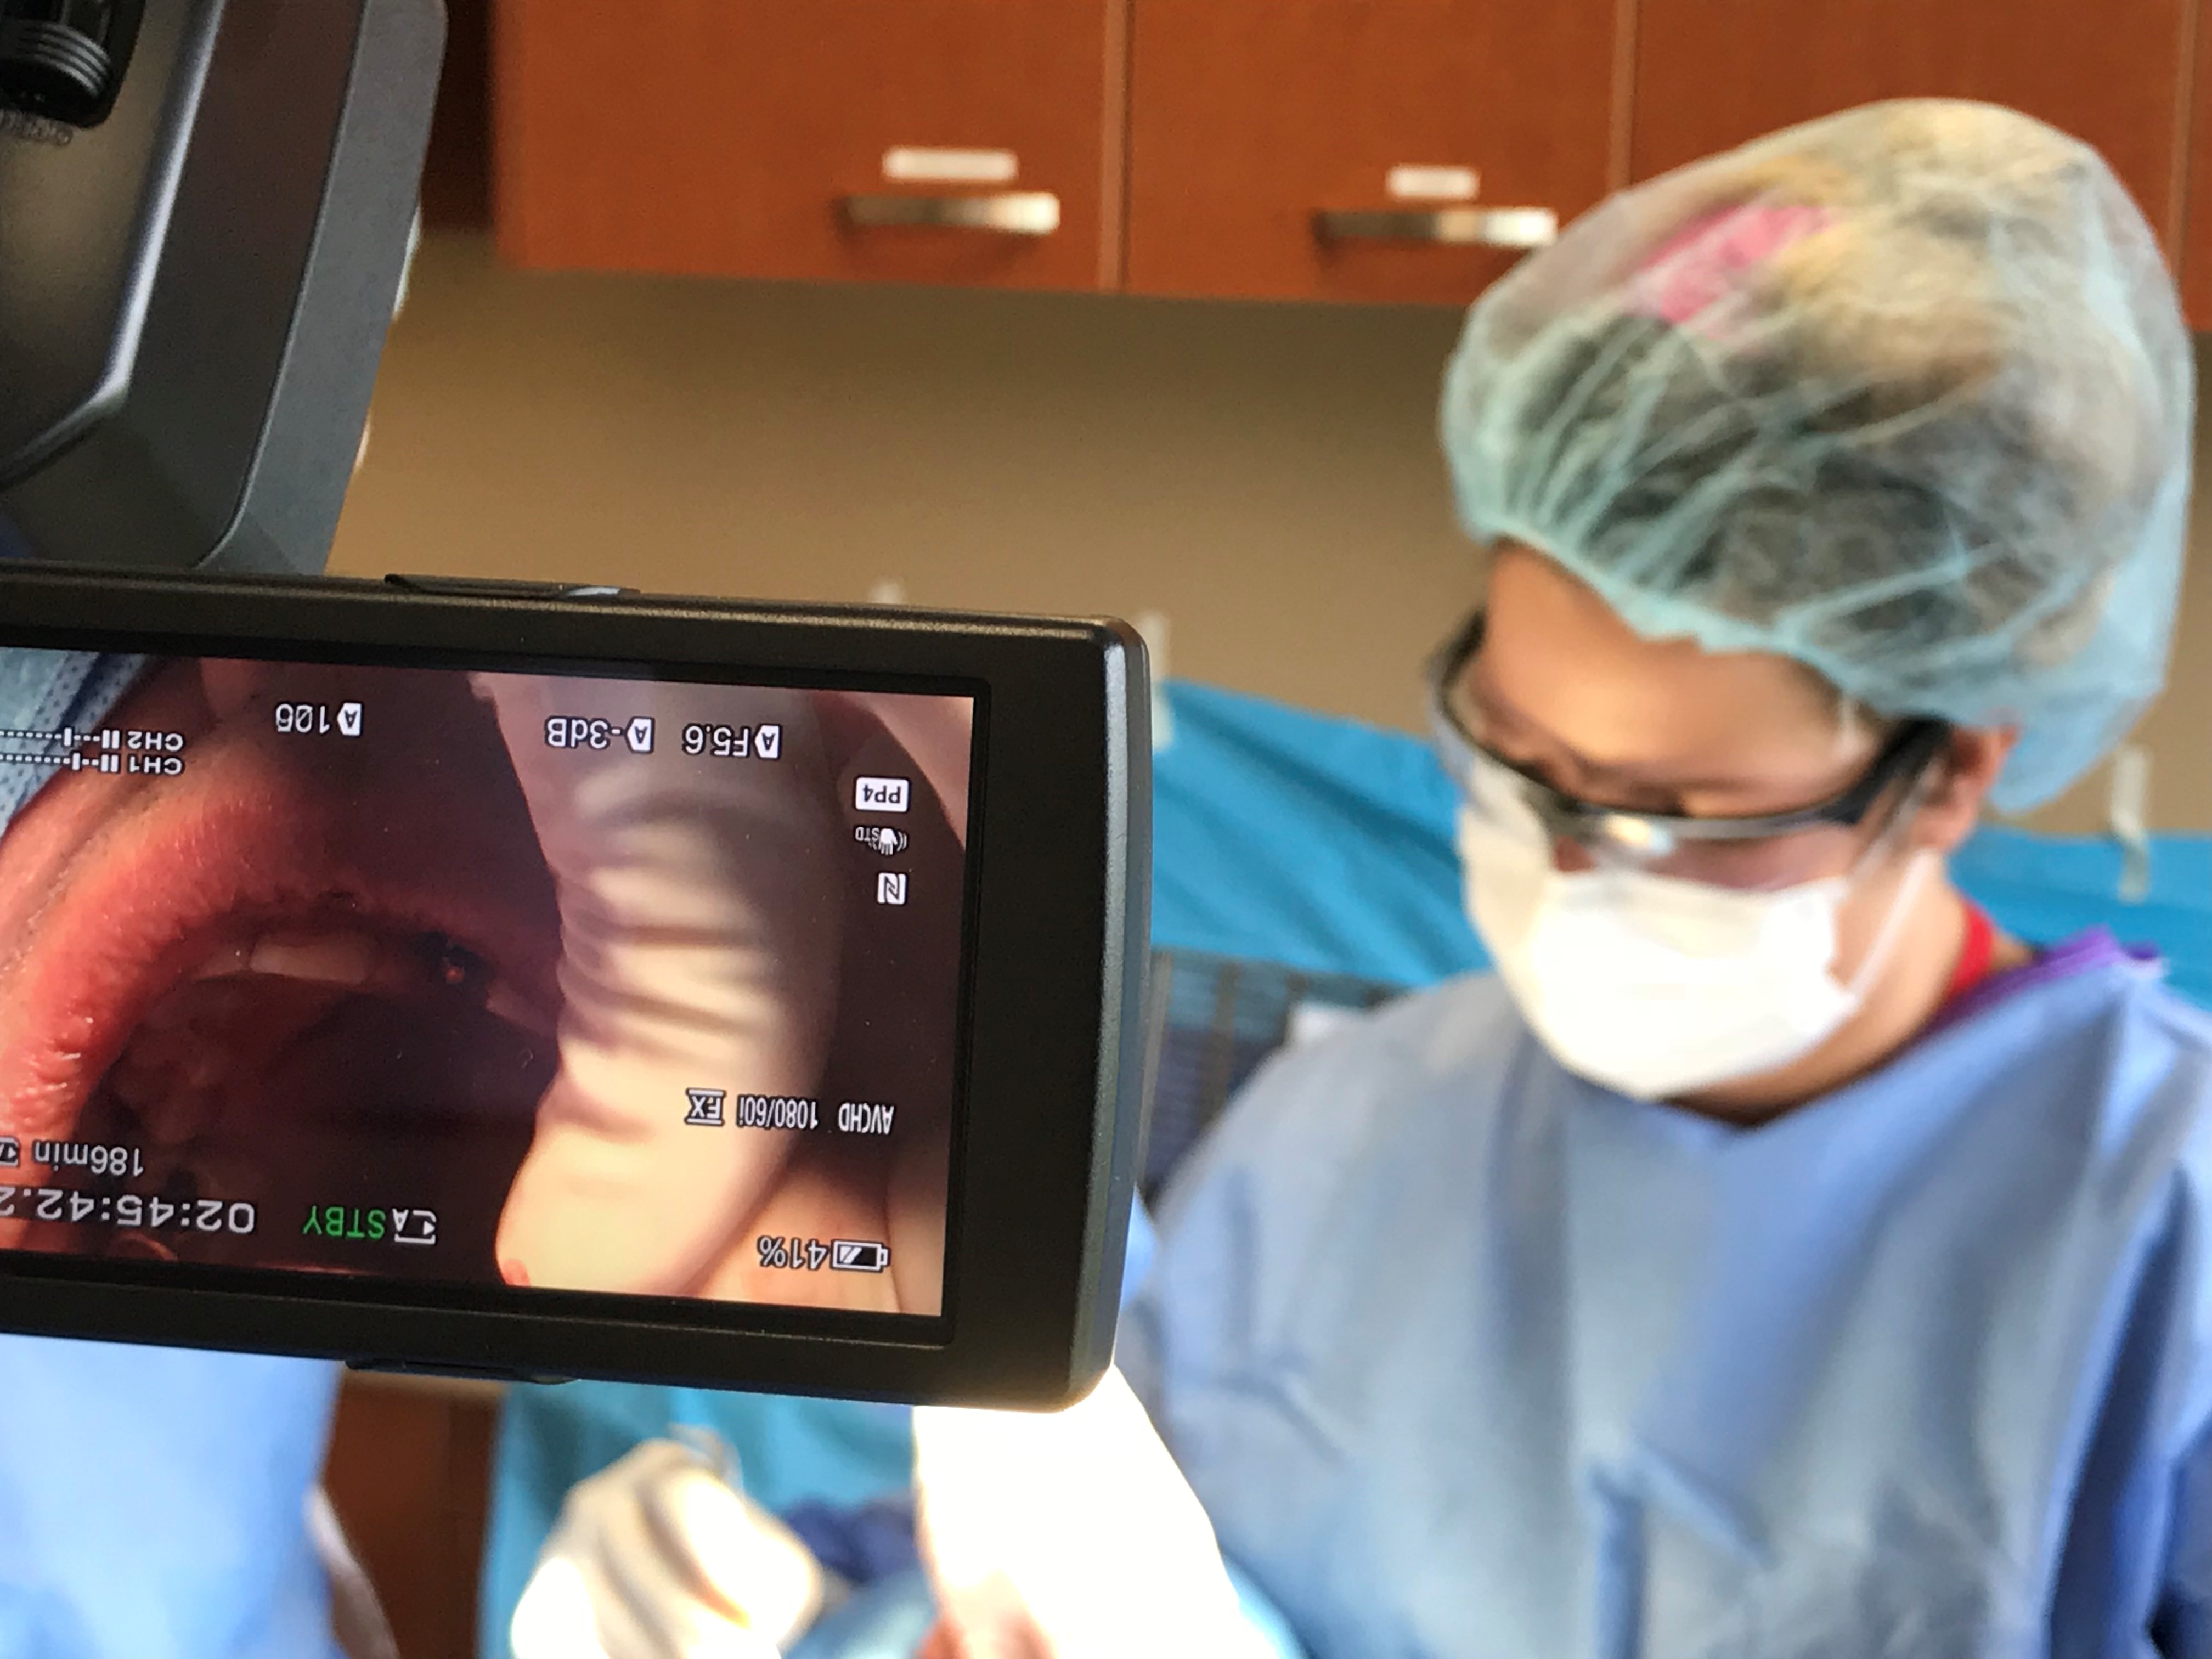 Dr. Gian Pietro Schincaglia records an oral surgery implant procedure for use in the classroom.